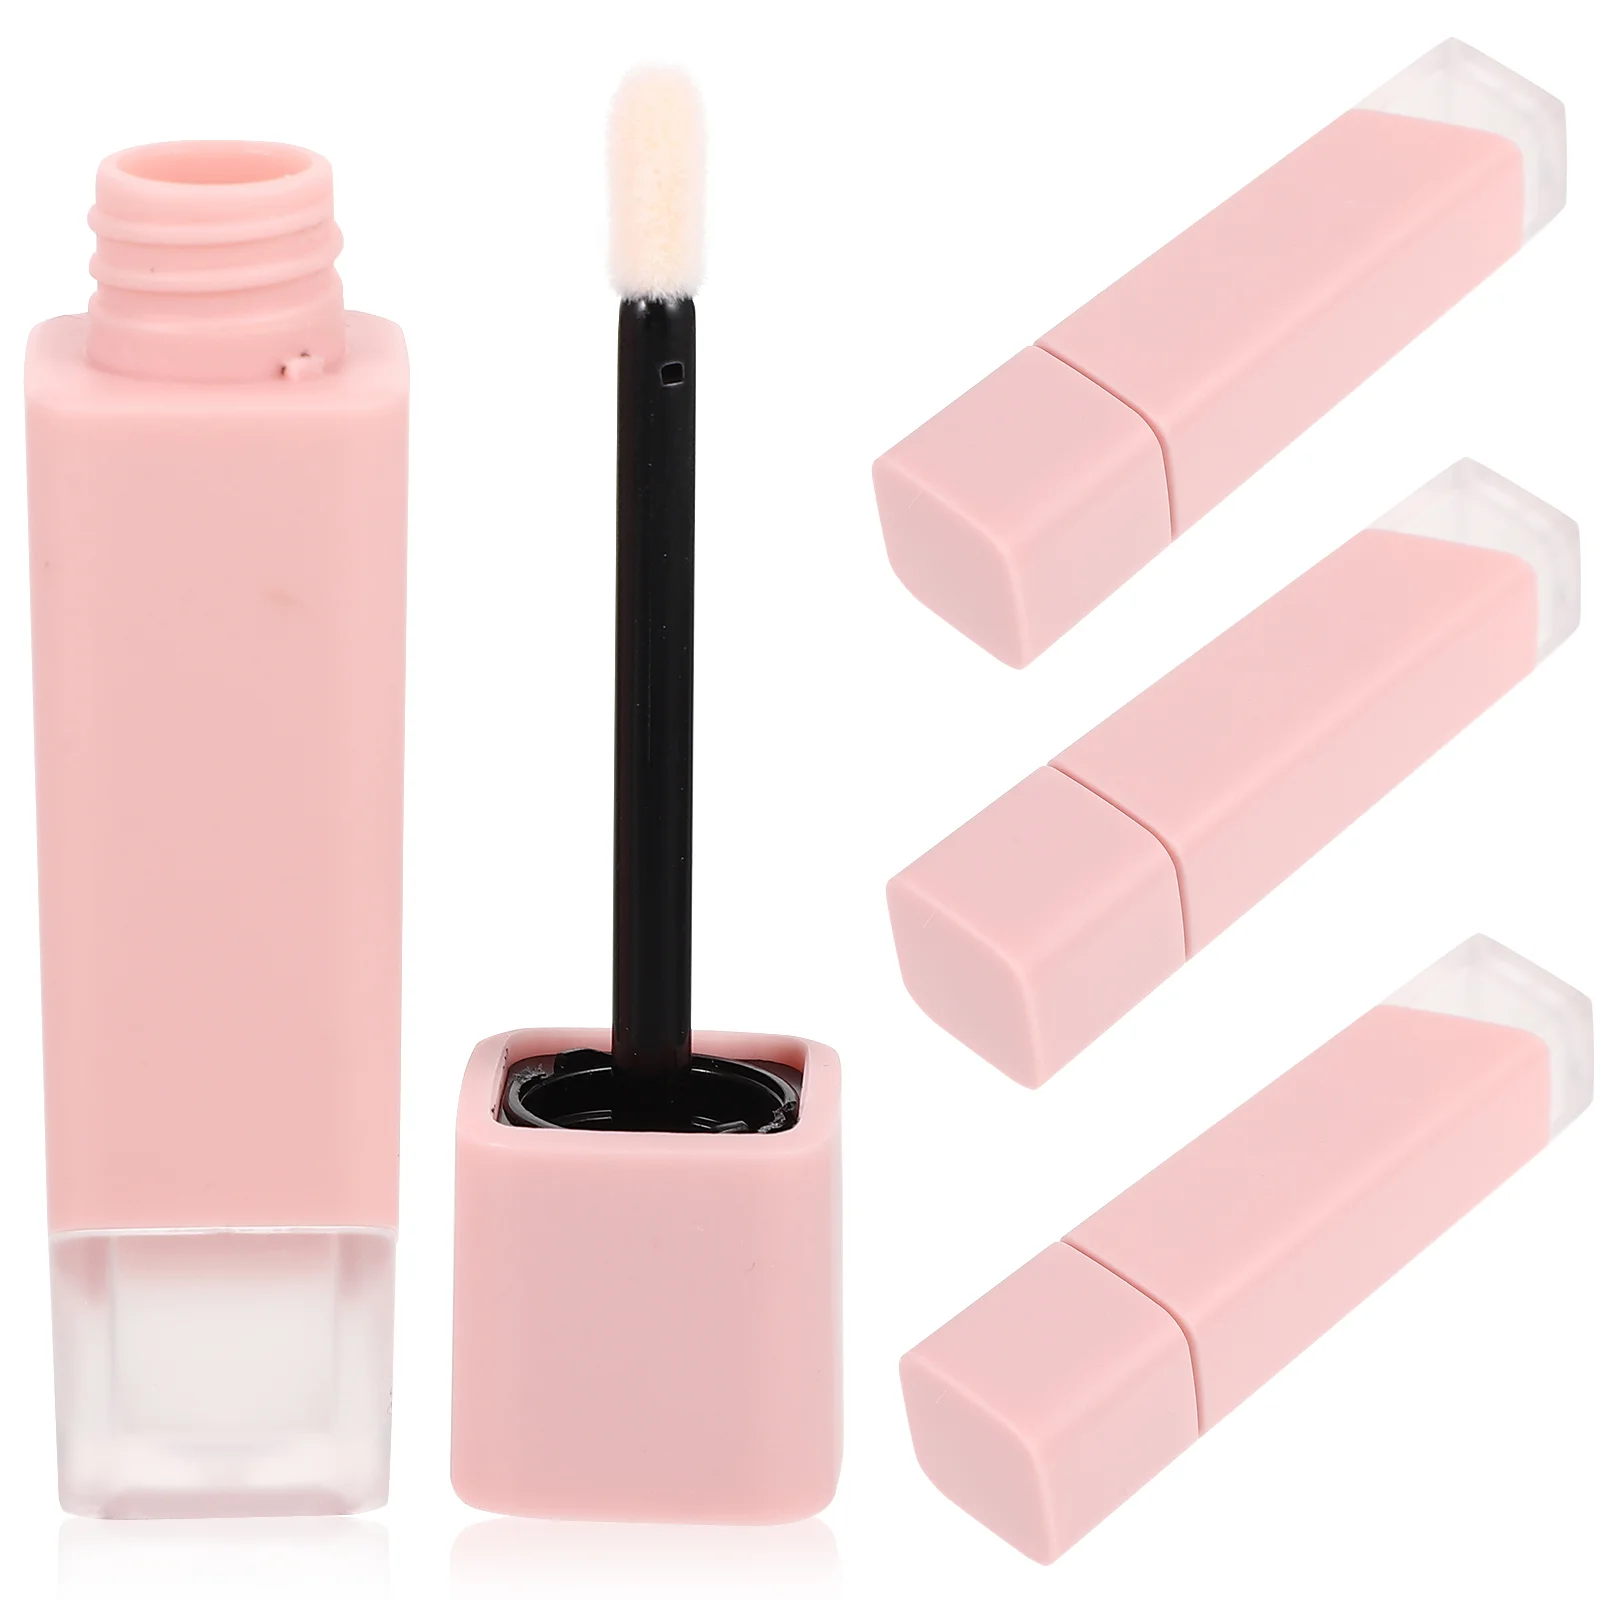 

Lip Tube Gloss Refillable Container Containers Tubes Chapstick Lipstick Tint Balm Empty Cream Plastic Mini Bottles Diy Vial